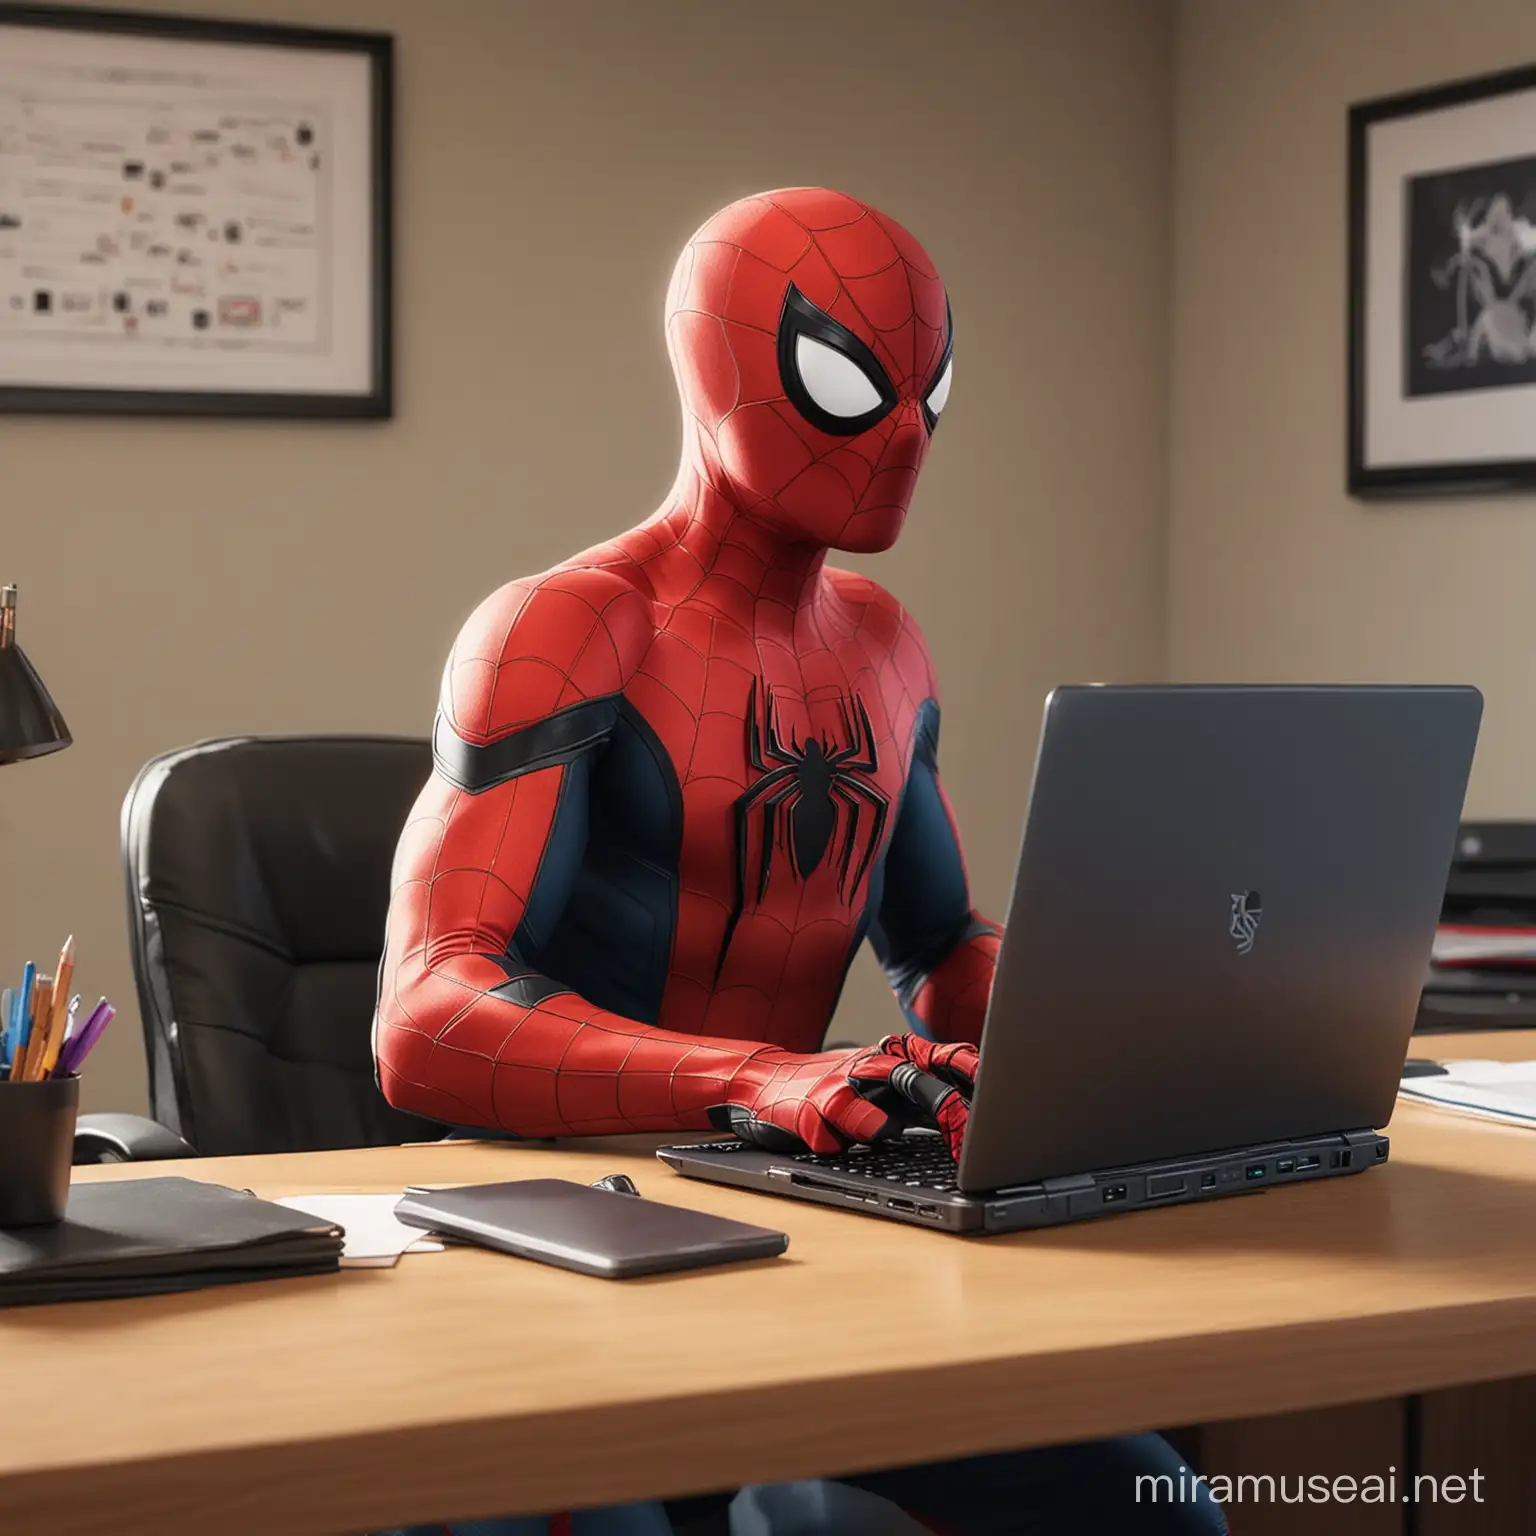 cartoon spider-man, wearing the animated series suit, sitting alone in a private room at a desk typing on a laptop, front view